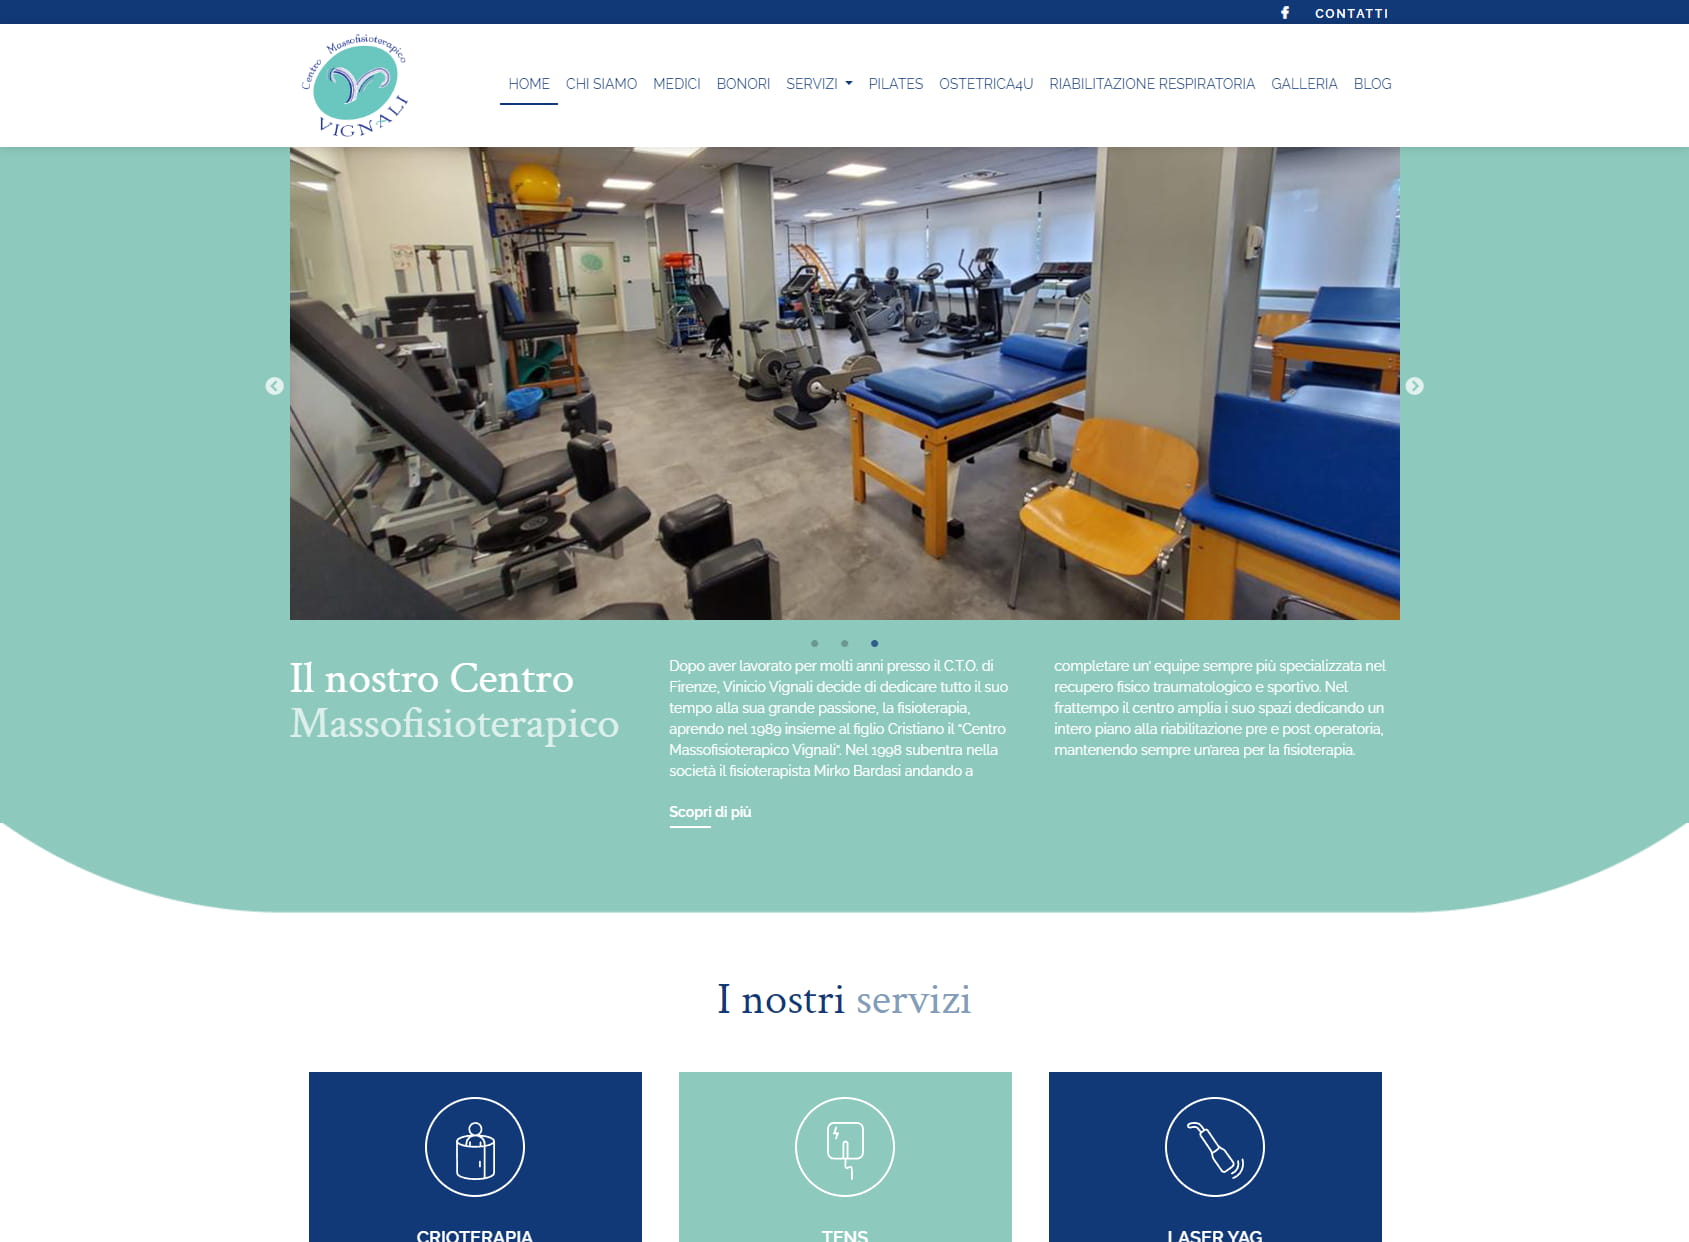 Physiotherapy Center Vignali